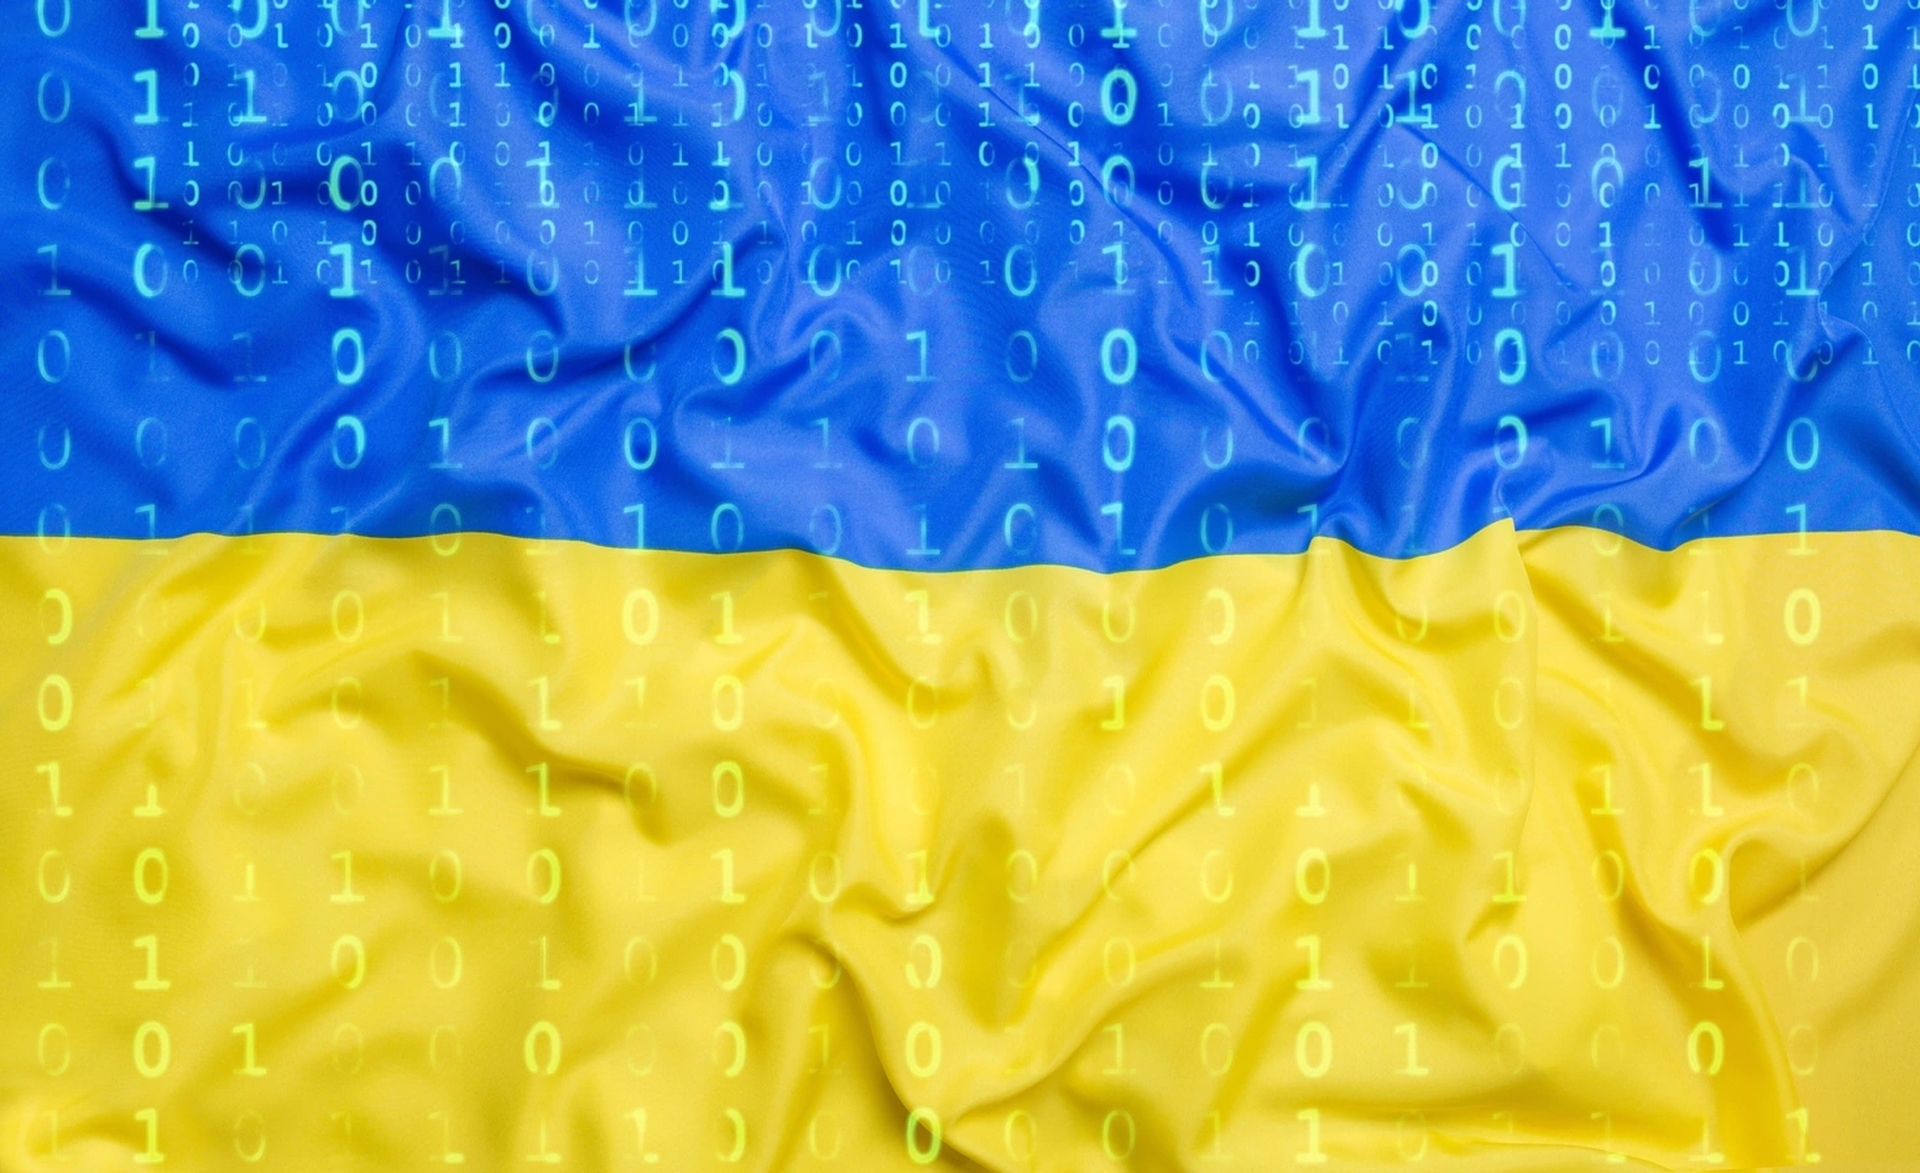 Even though the war between Ukraine and Russia has been going on for months, the Ukraine fintech industry keeps growing, and here is why.